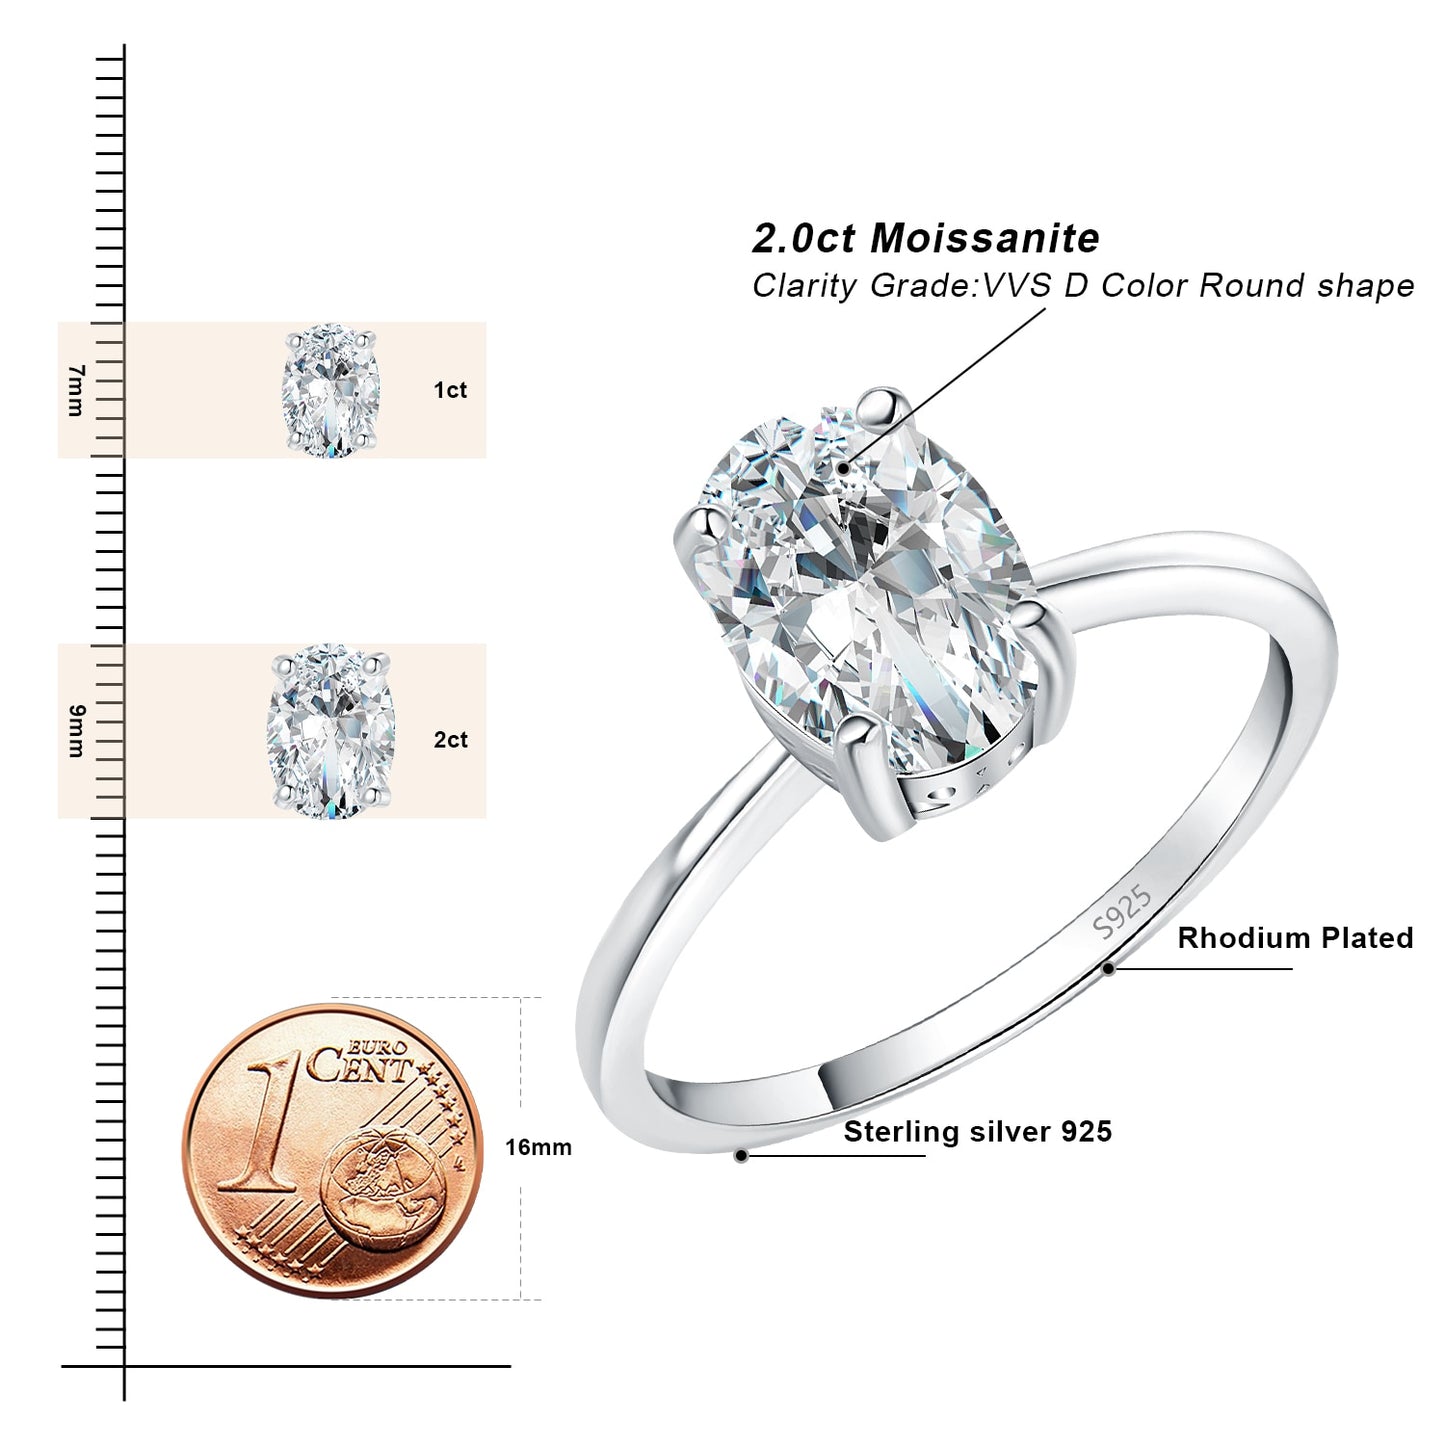 JewelryPalace Moissanite D Color 1ct 2ct Oval S925 Sterling Silver Solitaire Wedding Ring for Woman Yellow Rose Gold Plated